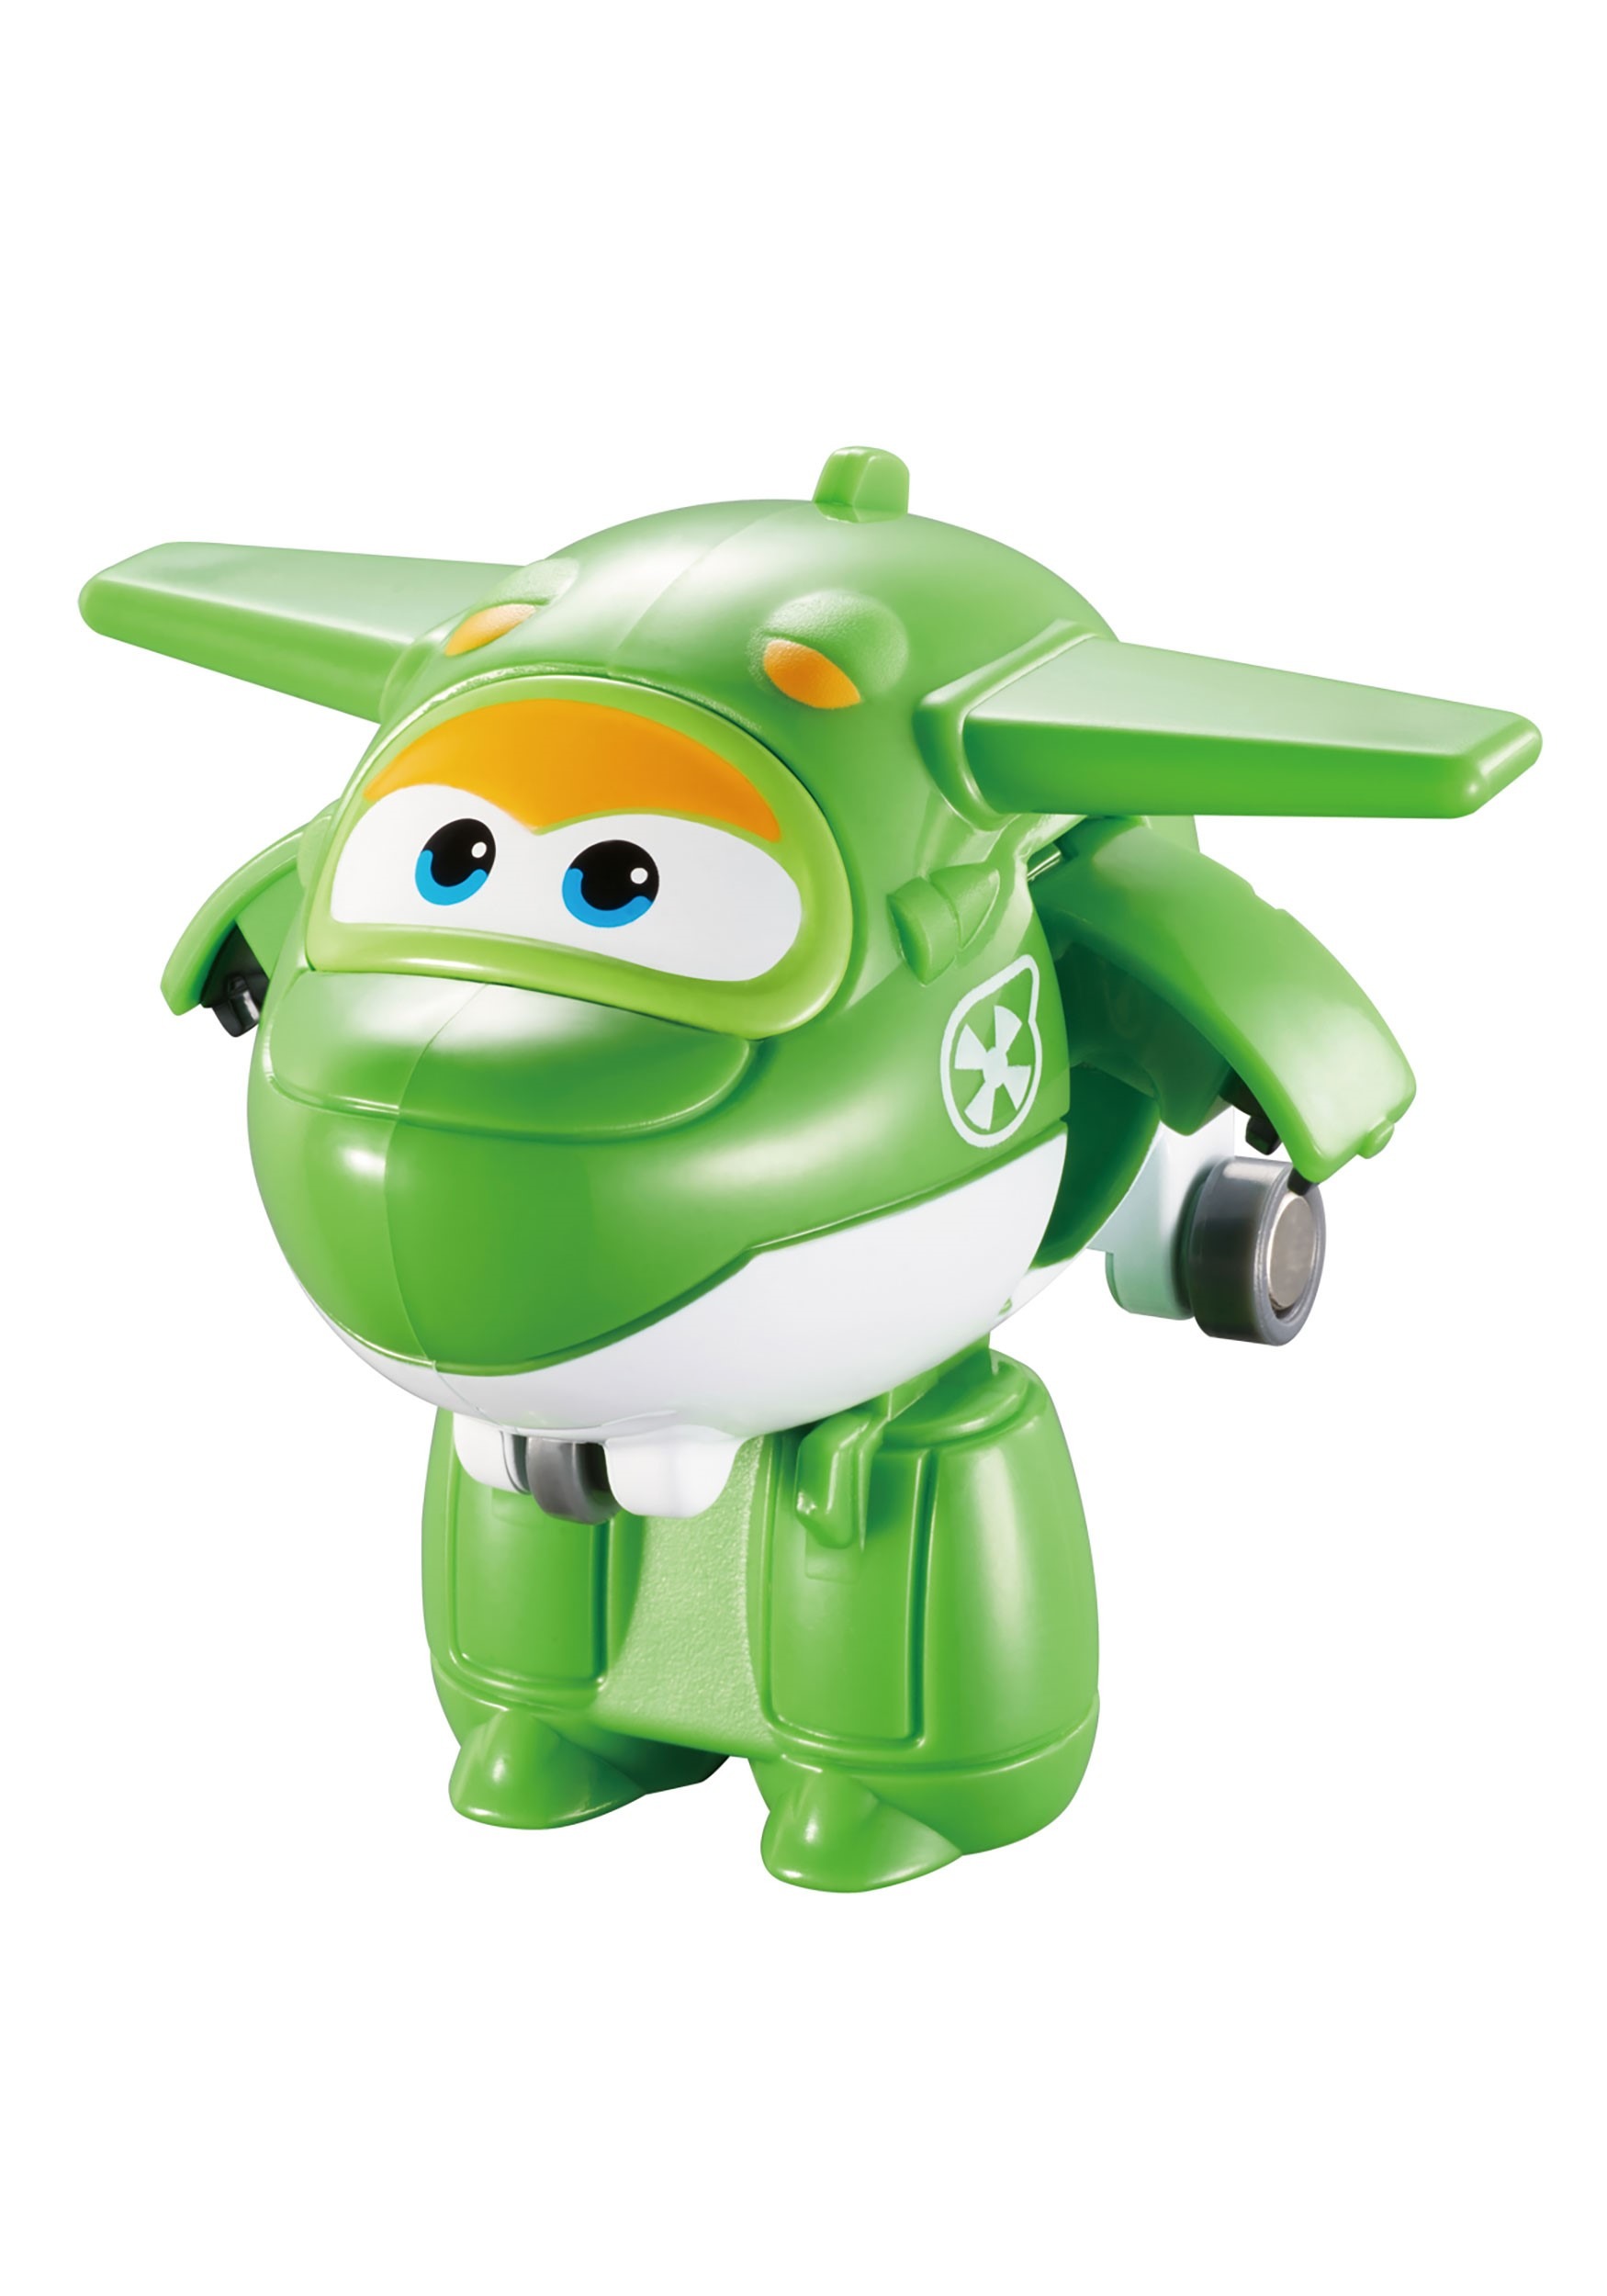 NEW 15 Toy Figures Super Wings Transform-a-bots World Airport Crew Series 1 